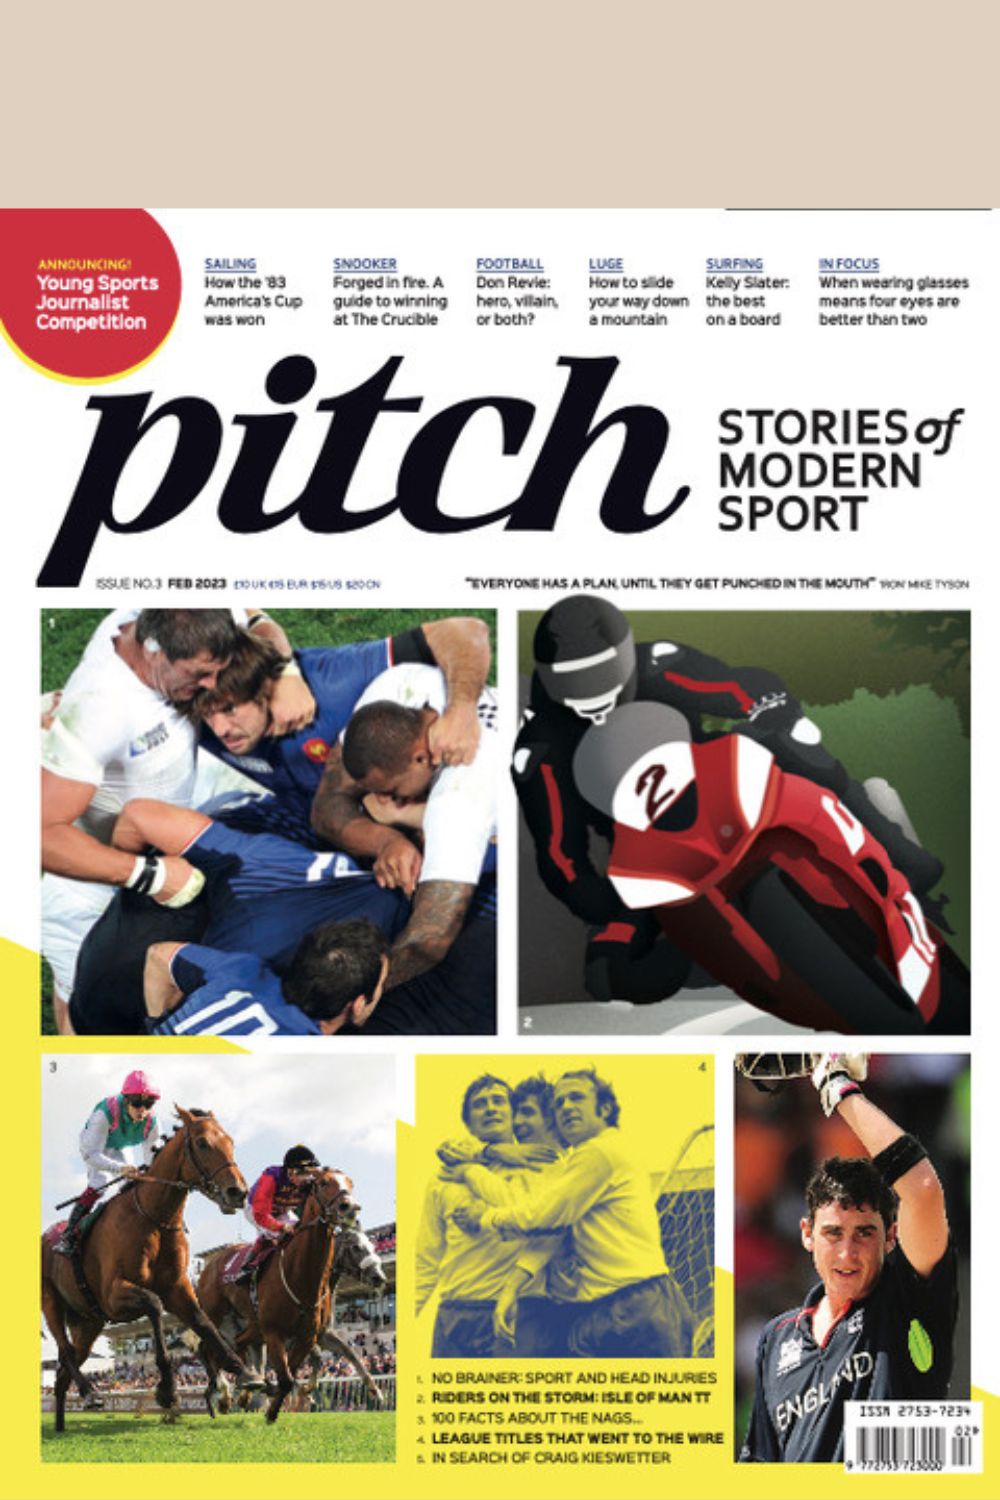 Pitch Magazine Issue 3 cover - Stories of Modern Sport